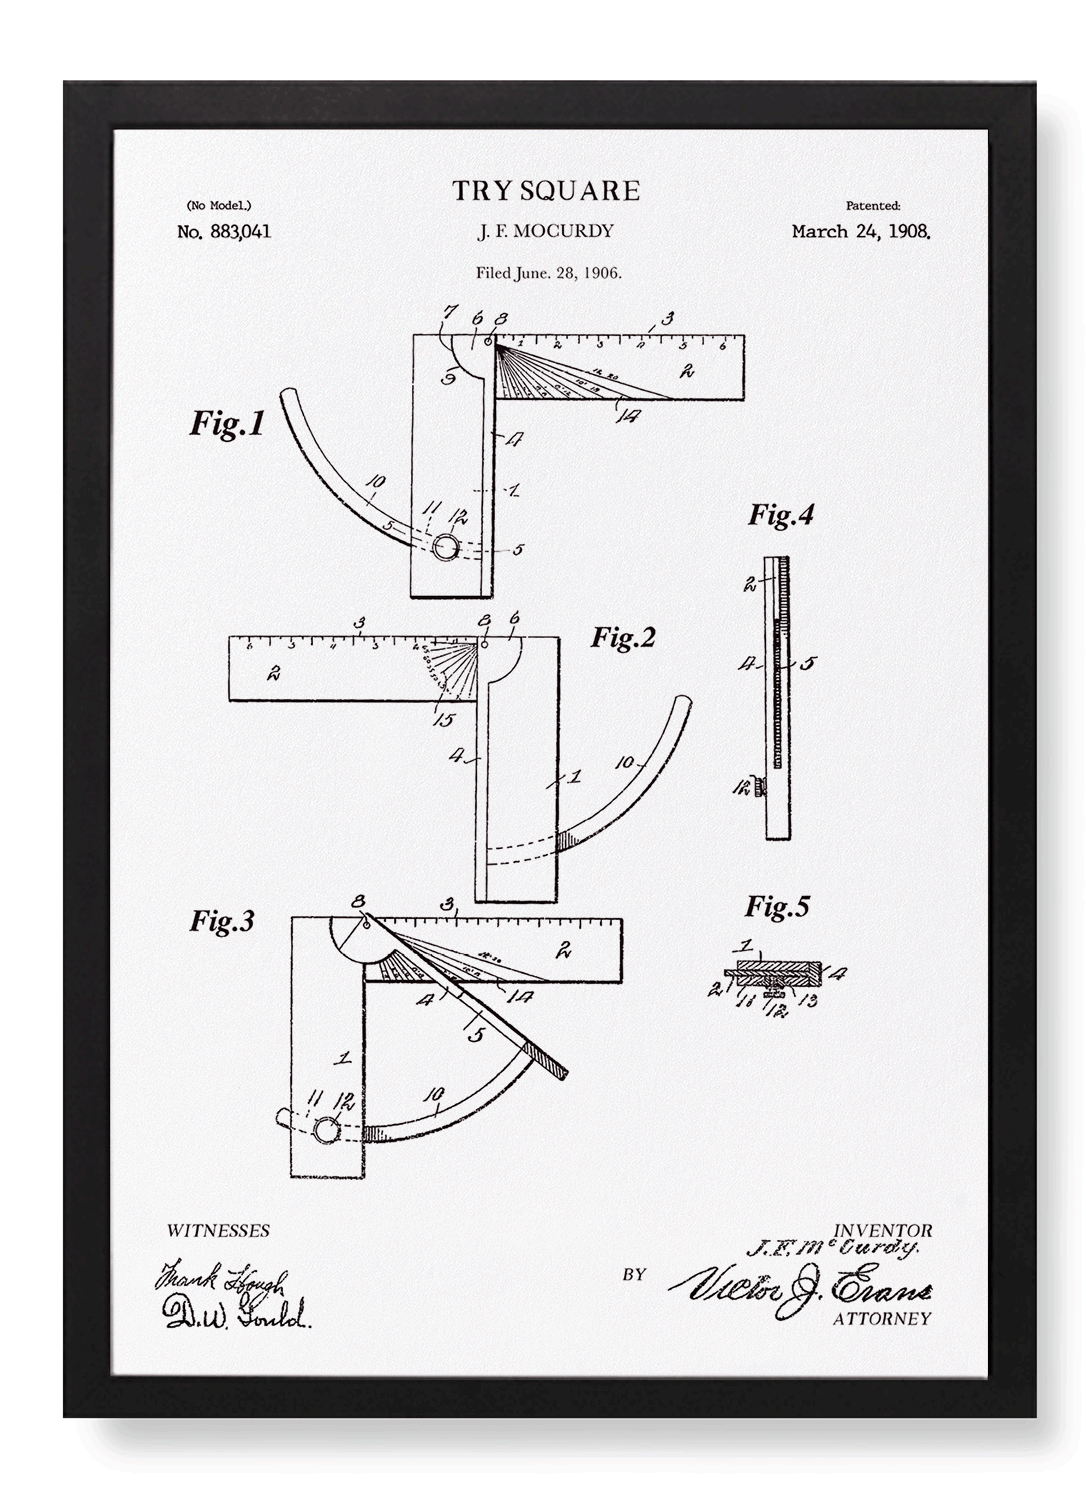 PATENT OF TRY SQUARE (1908)